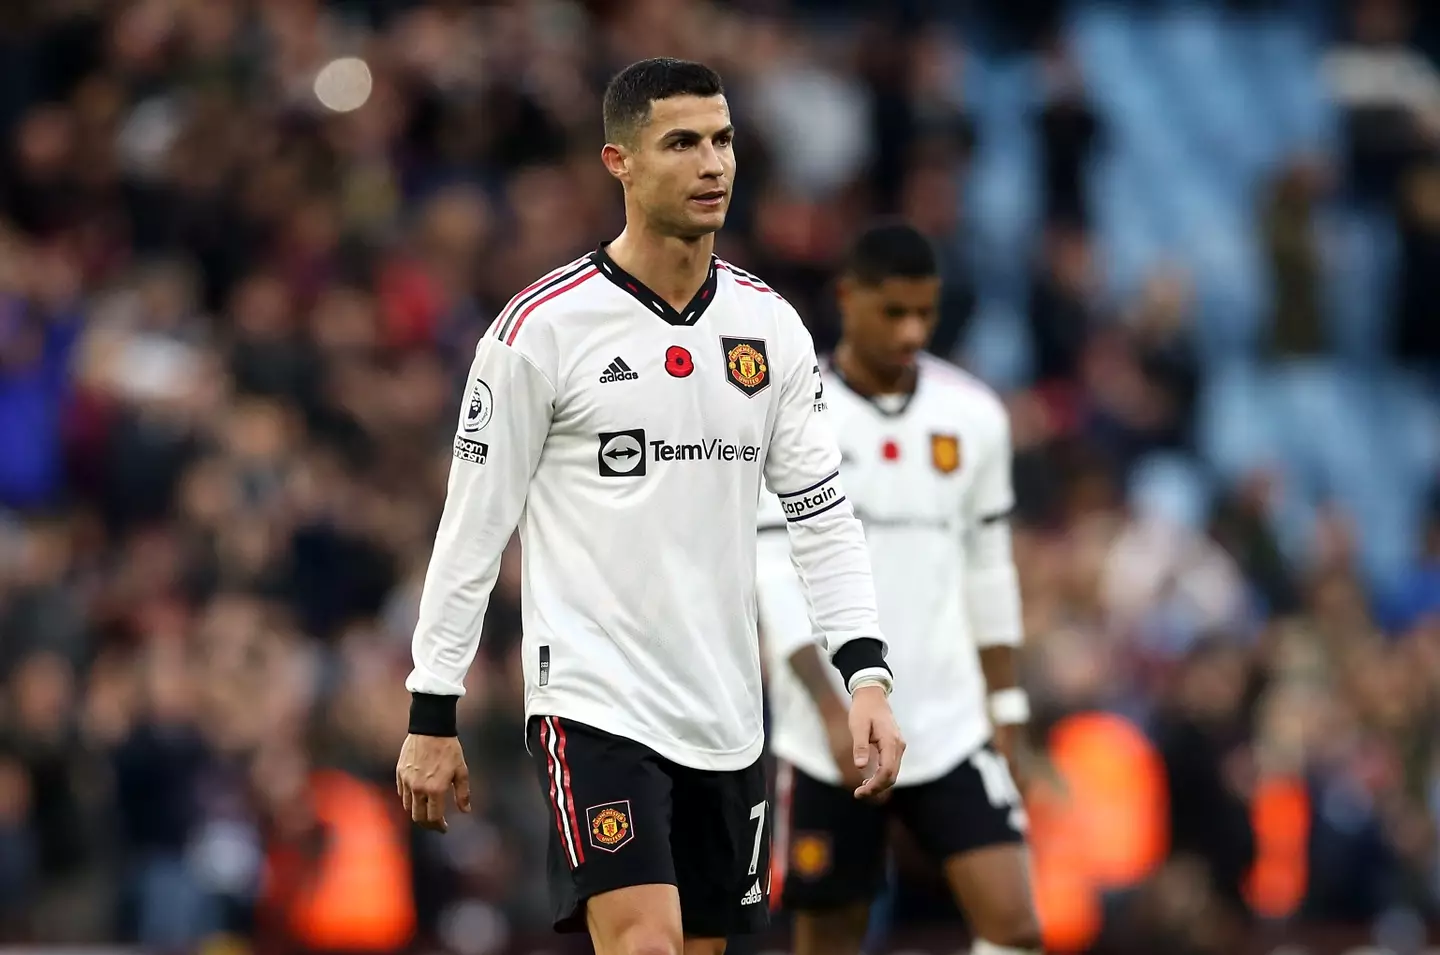 Ronaldo's last appearance to date was a 3-1 defeat to Aston Villa earlier this month. (Image